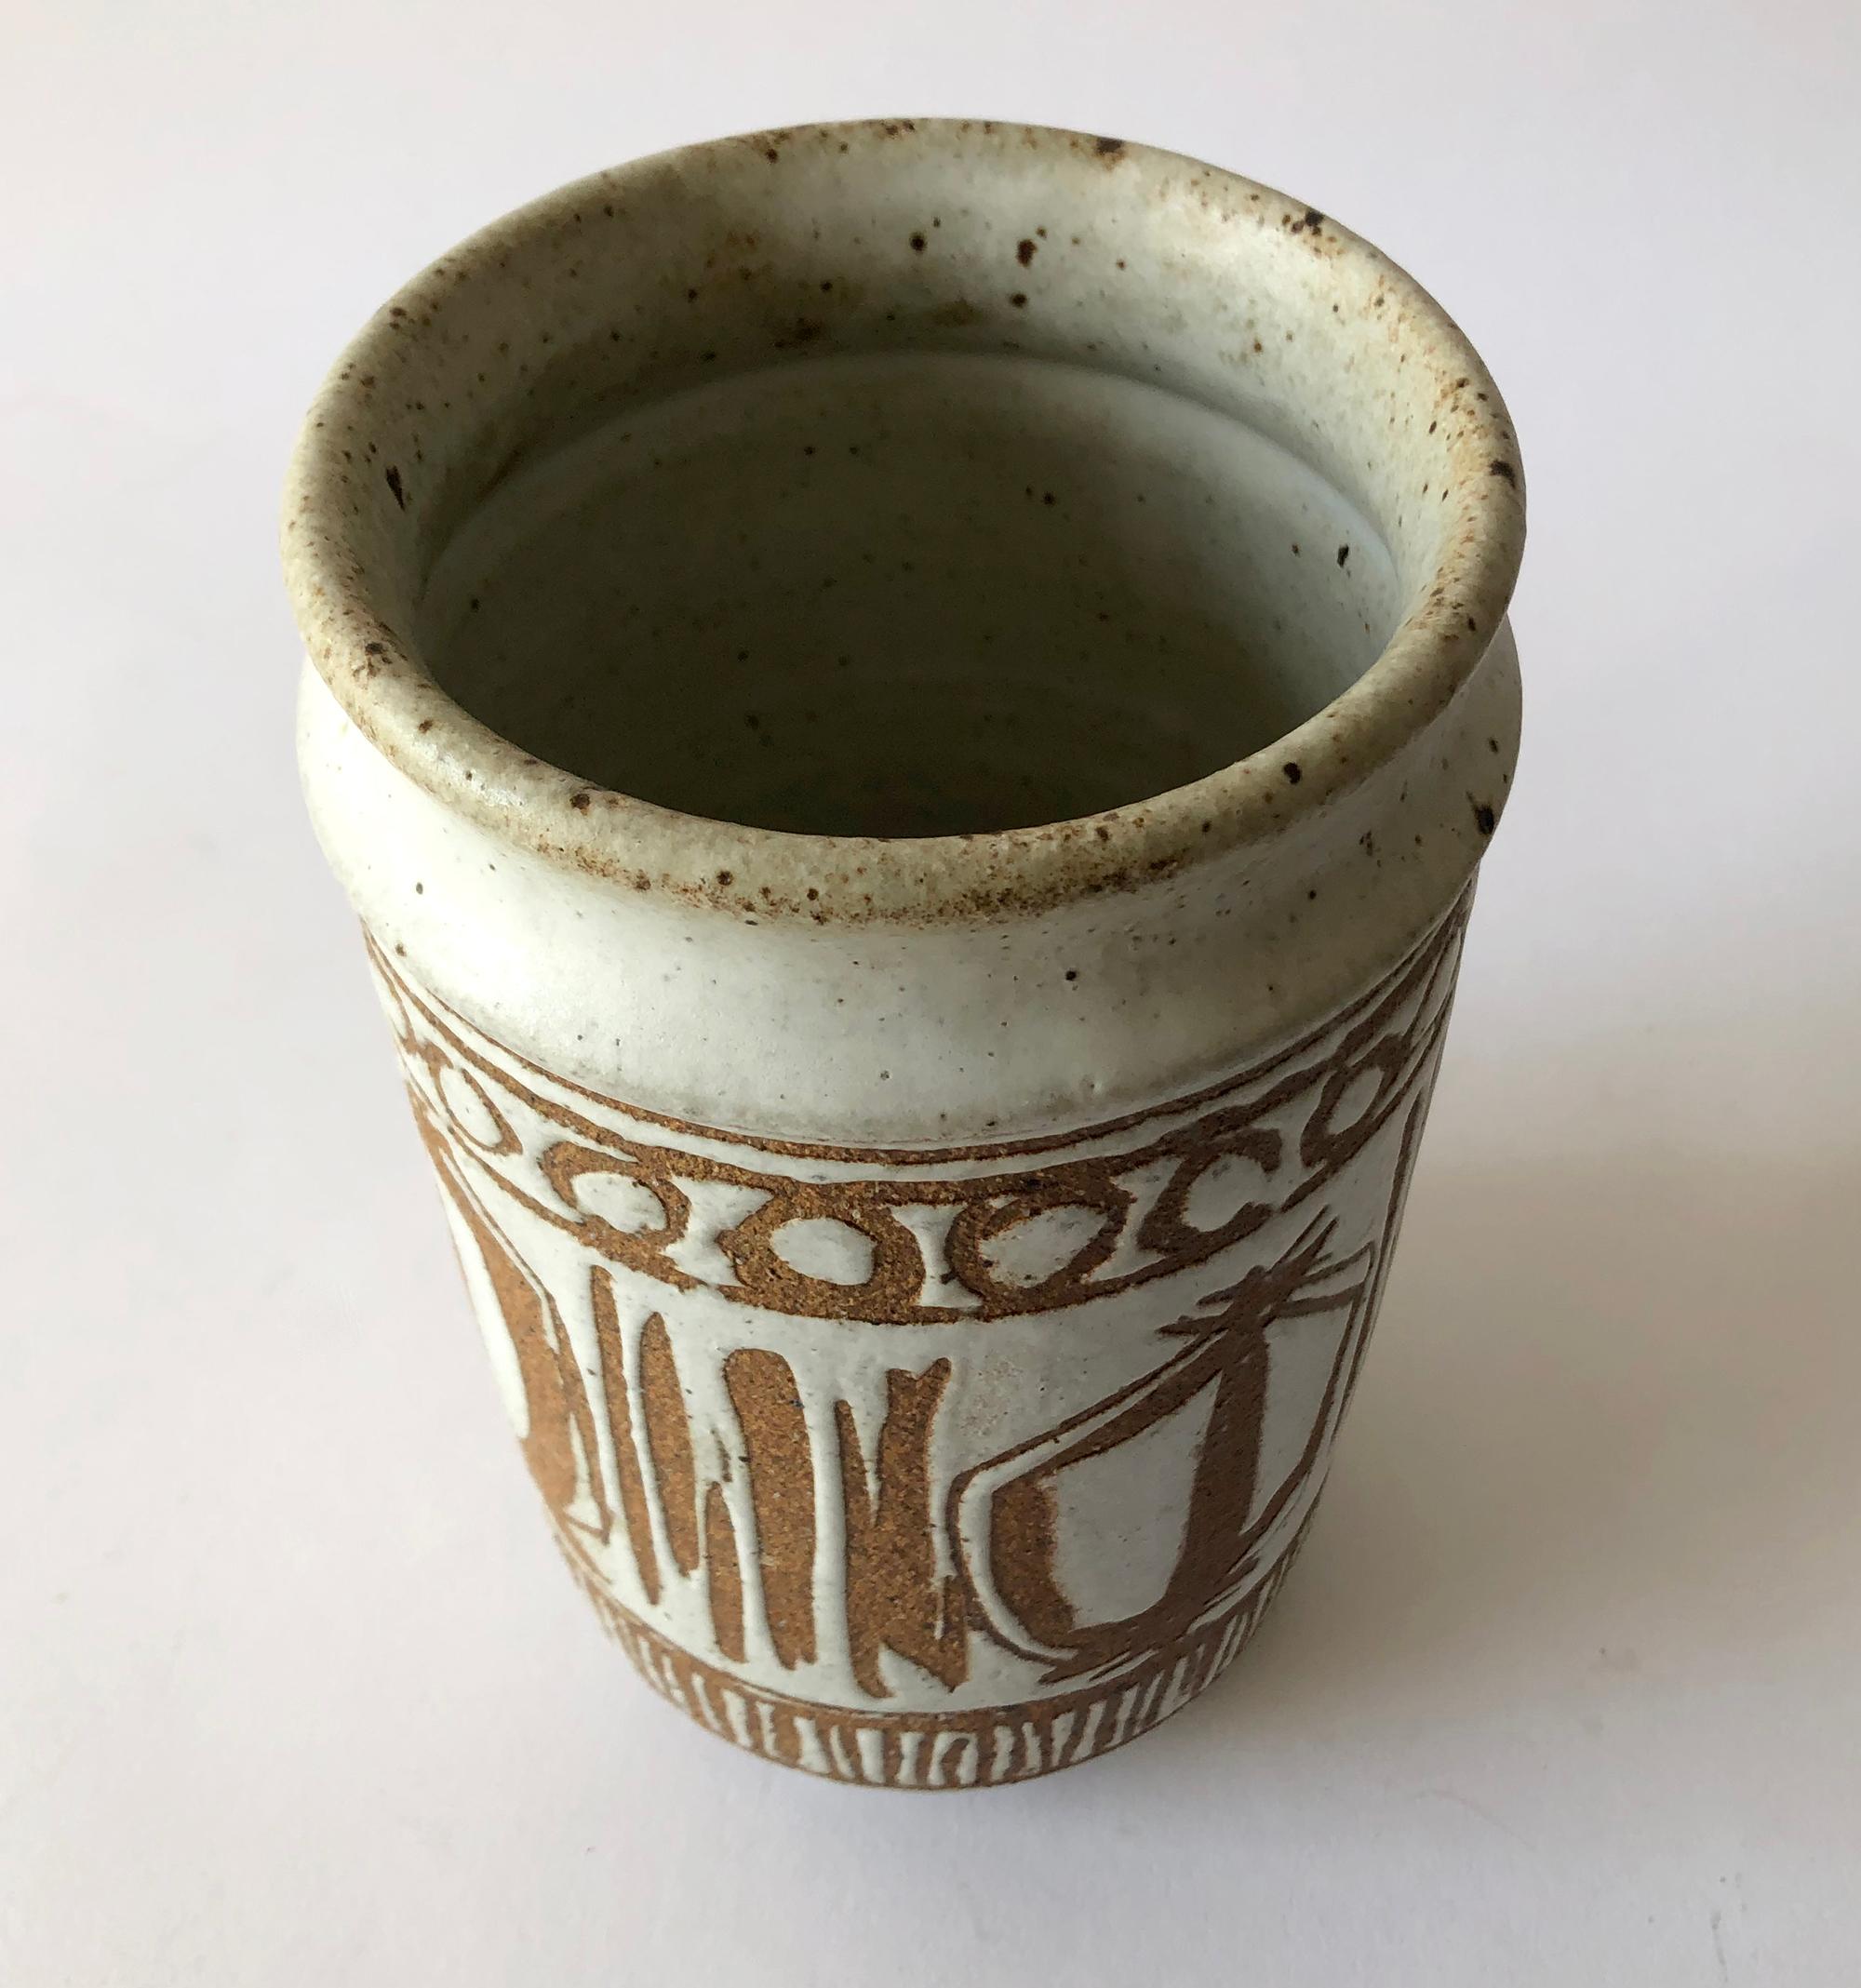 wax resist designs on pottery